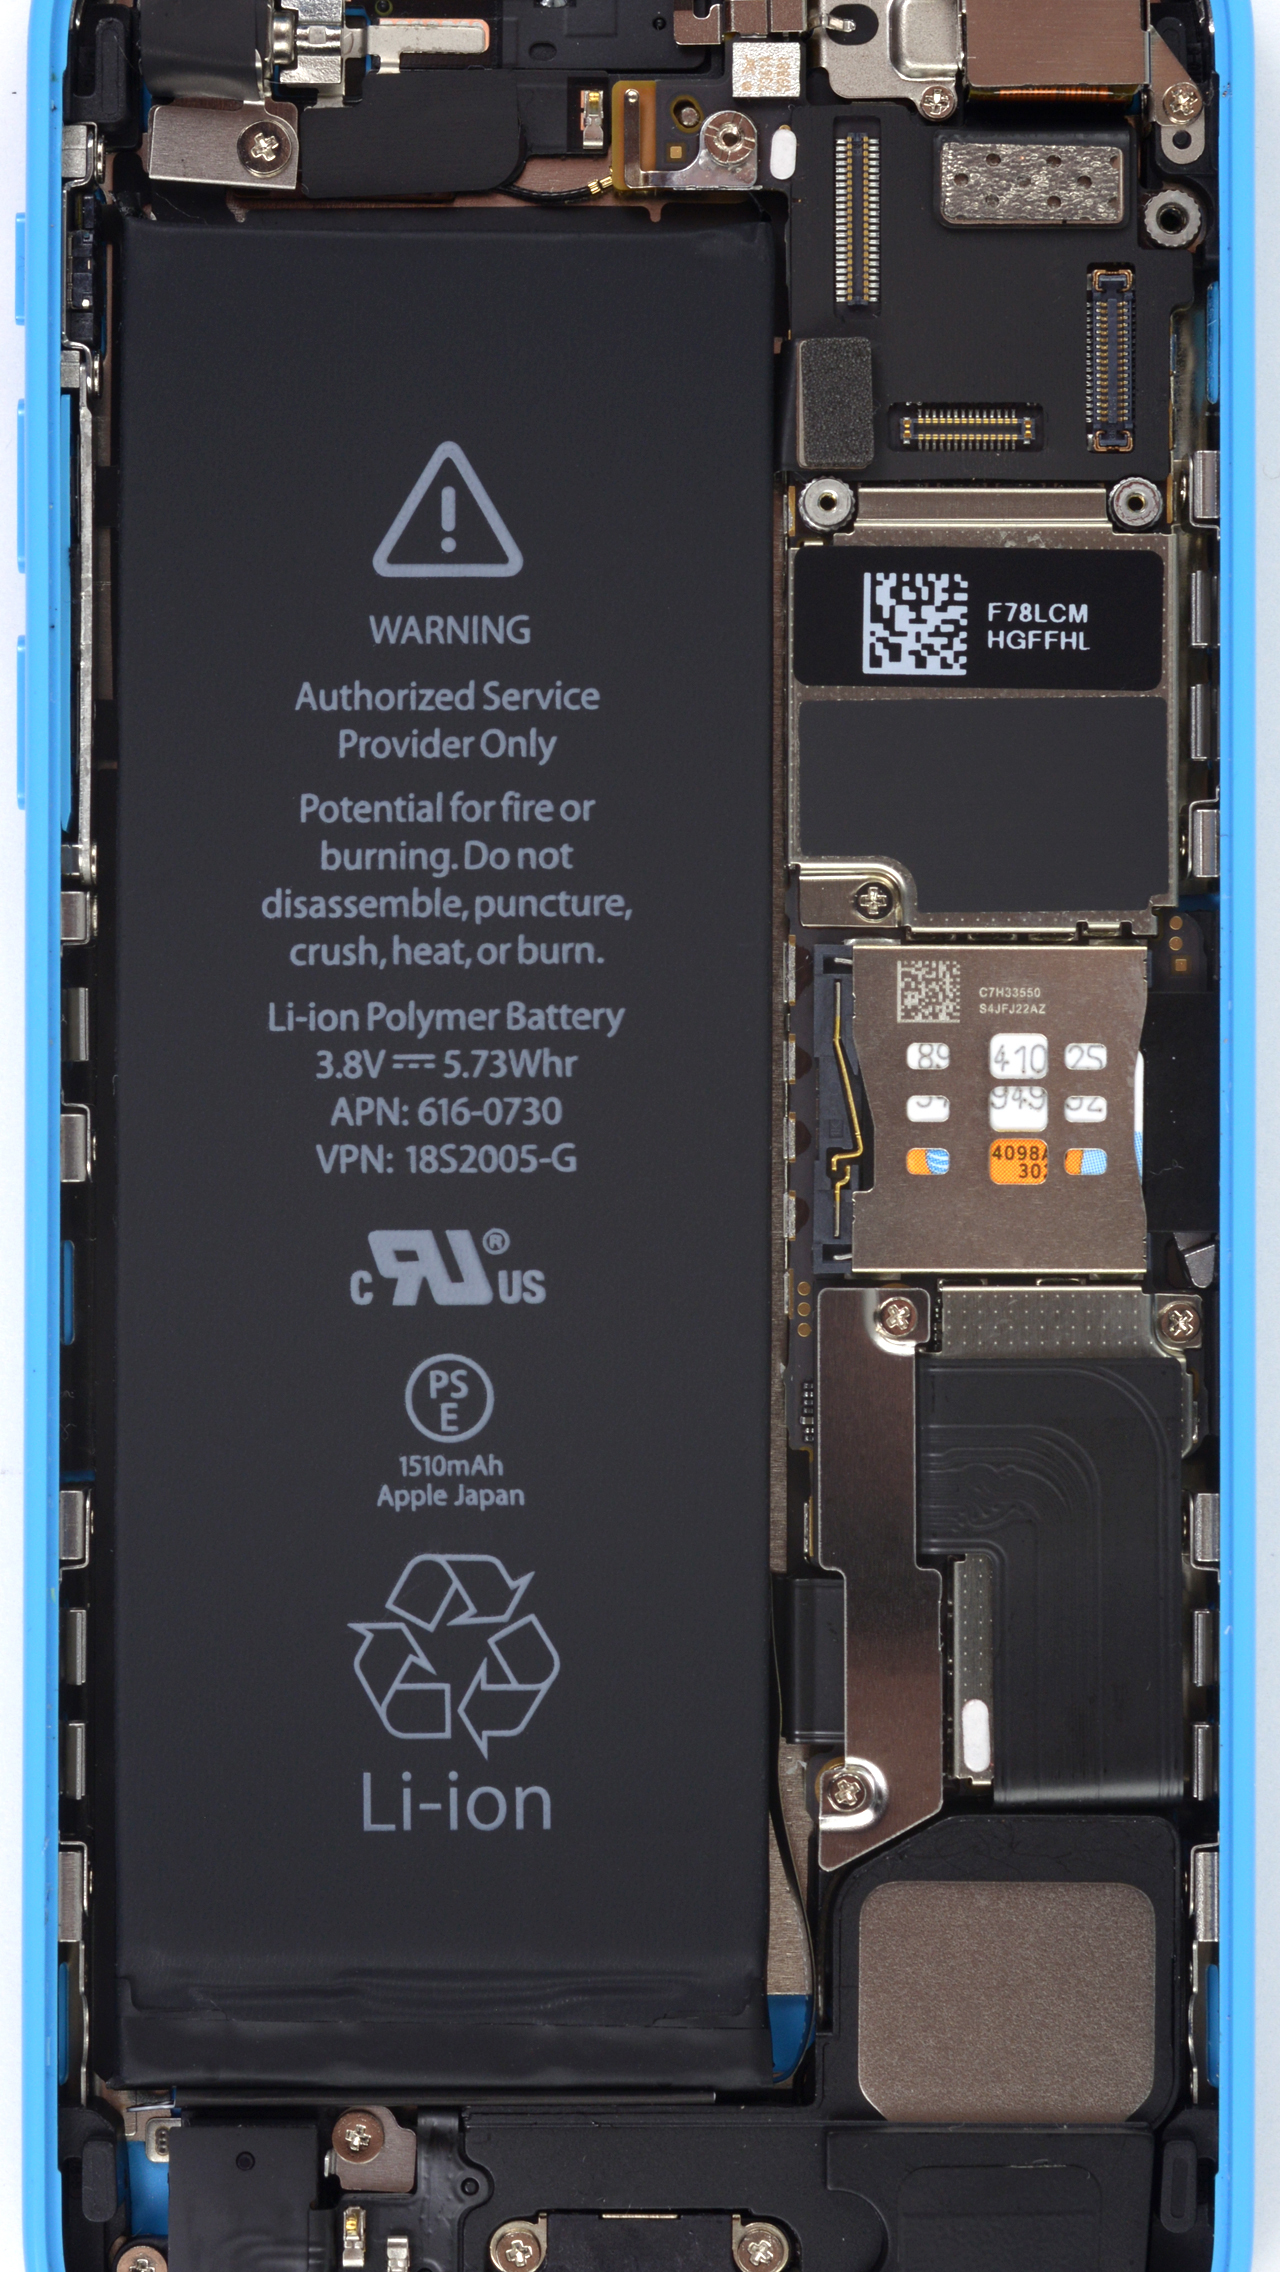 Download Wallpapers Of Iphone 5s And Iphone 5c Internals